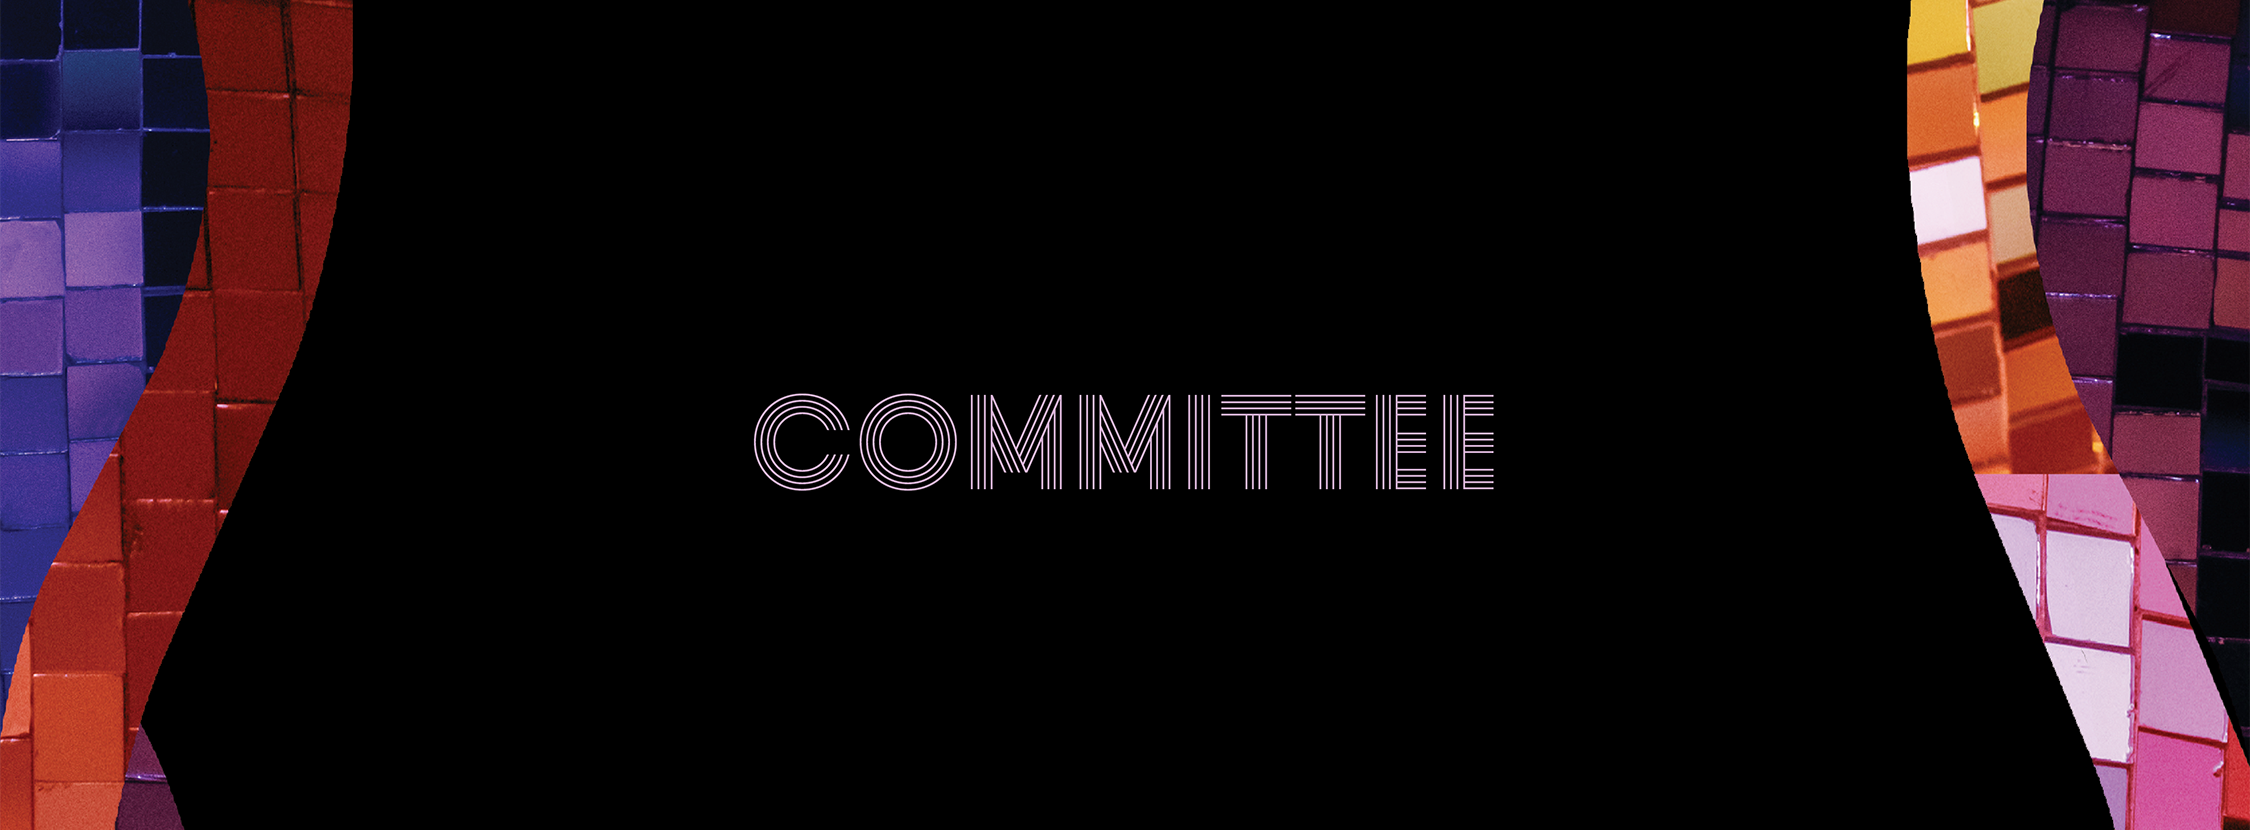 Committee - Banner Image